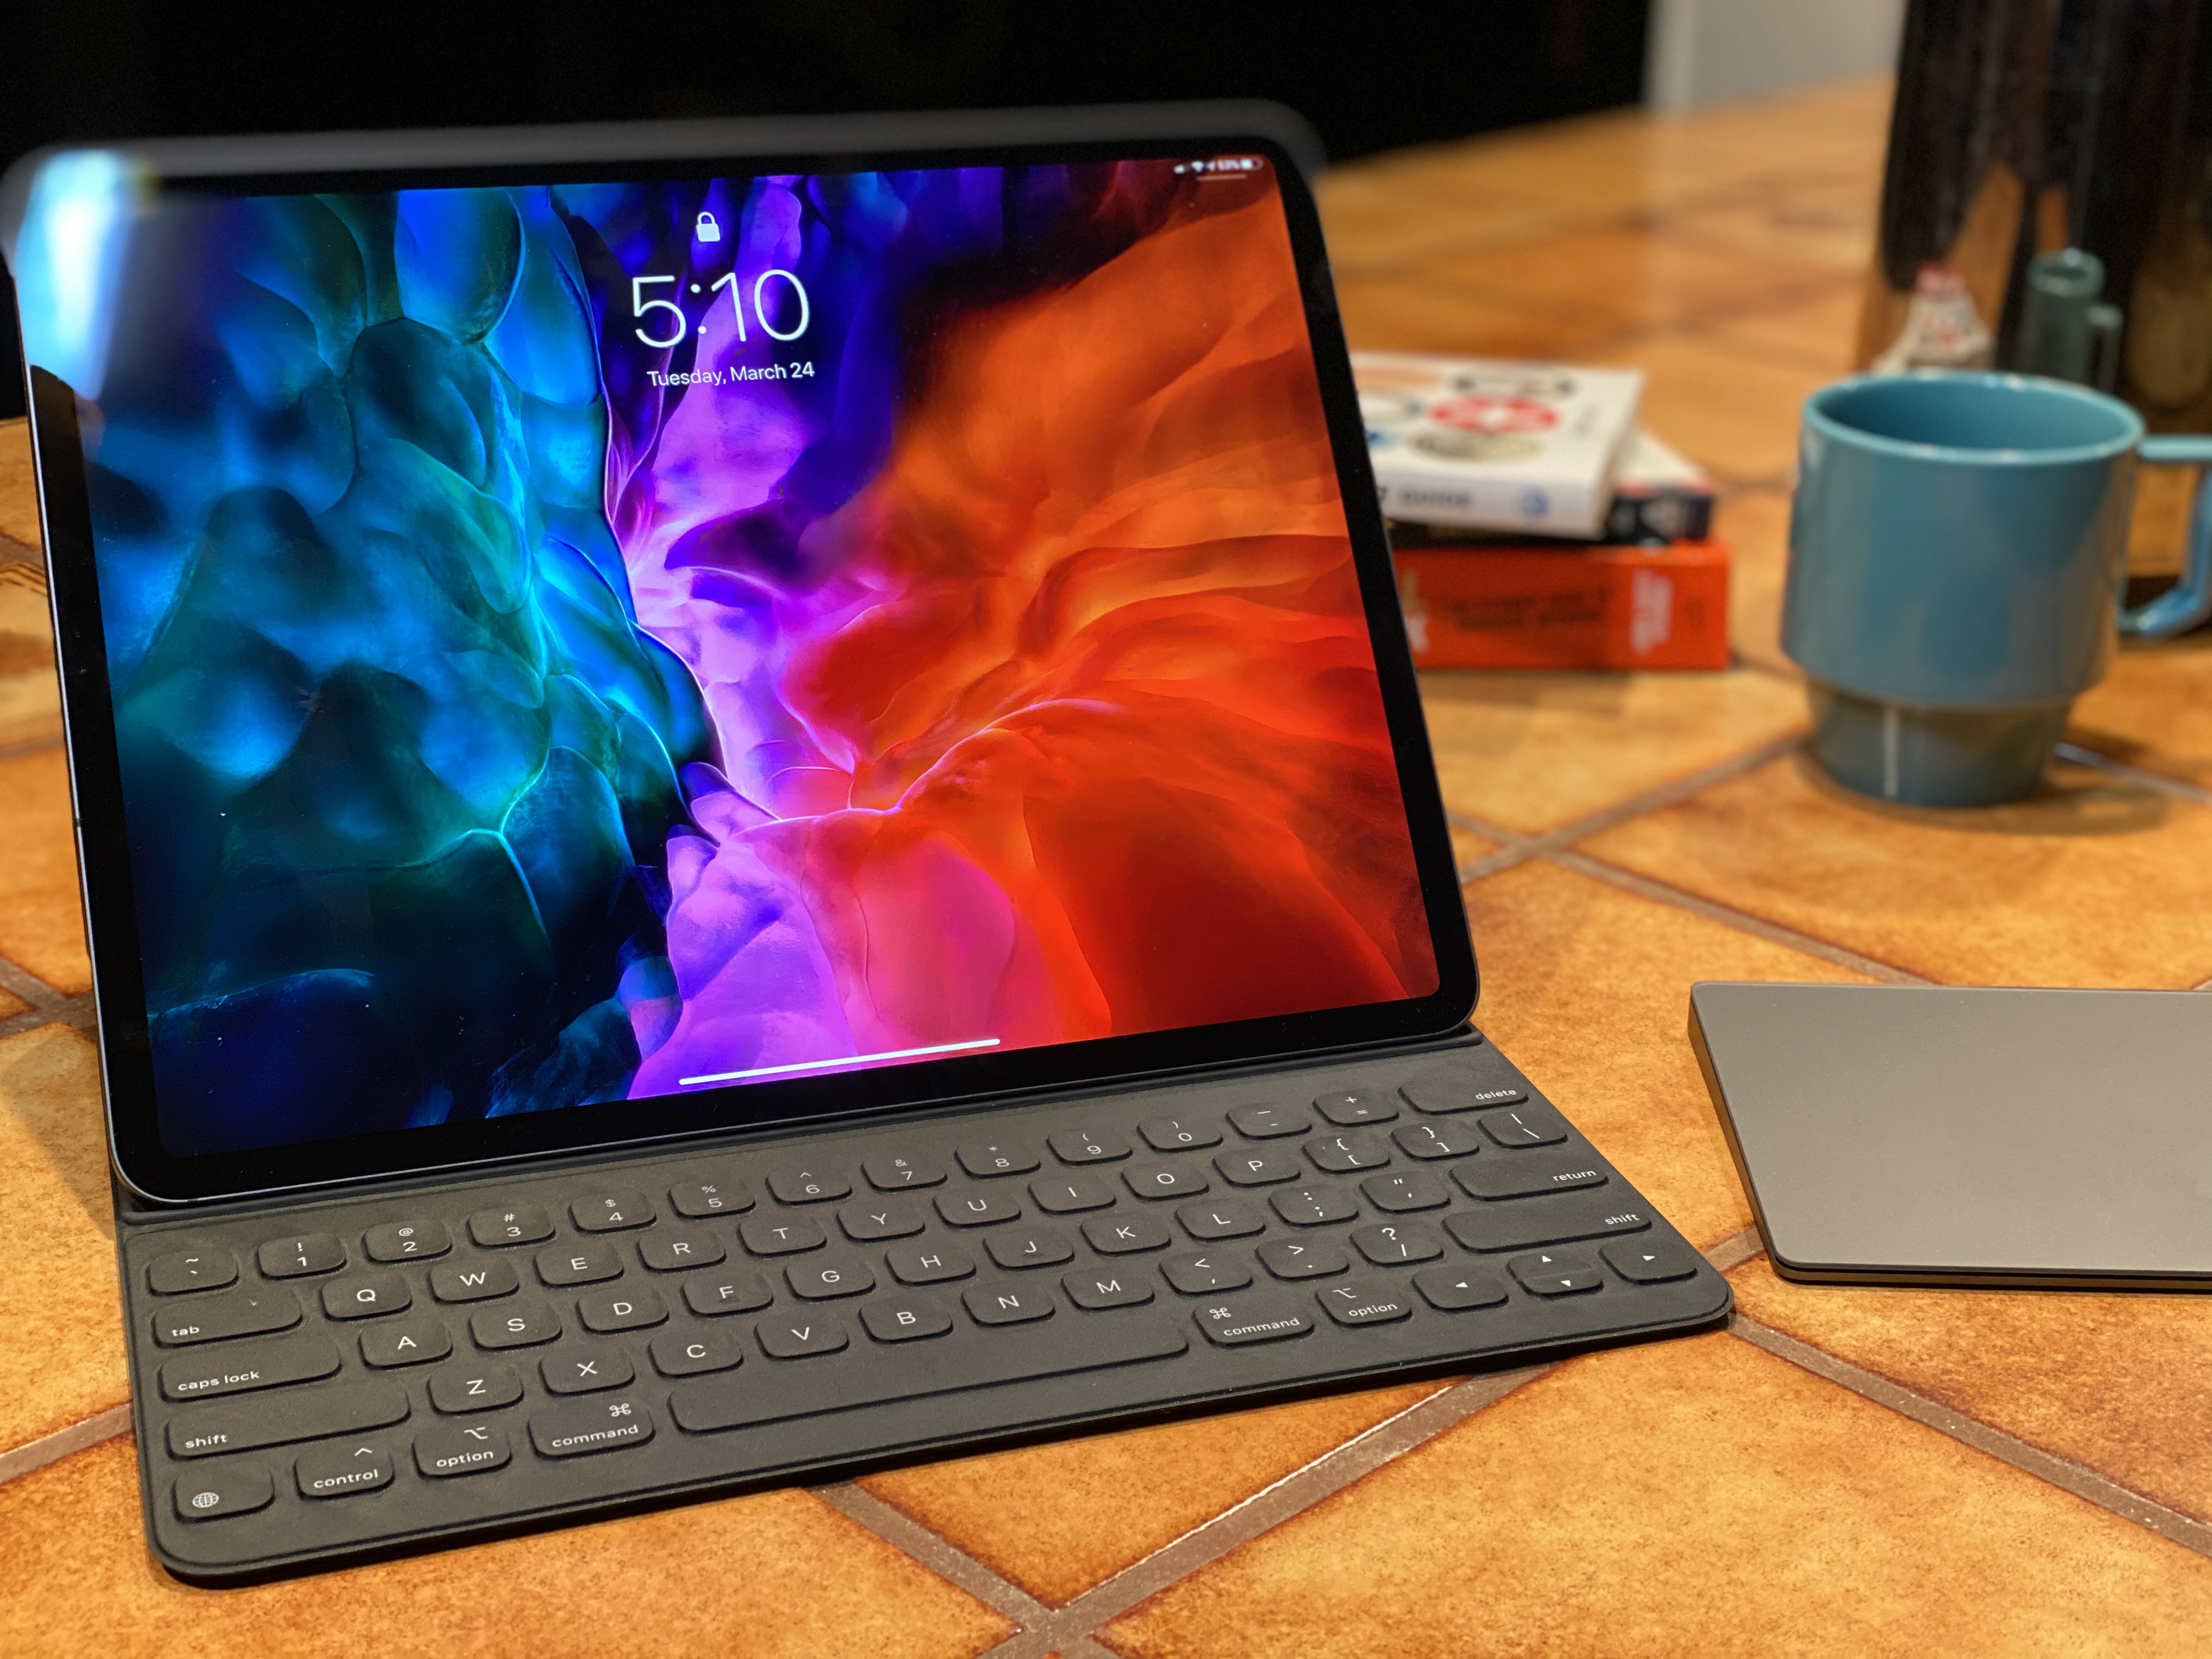 Apple iPad Air (2020) Review: The iPad Pro for Everyone Else